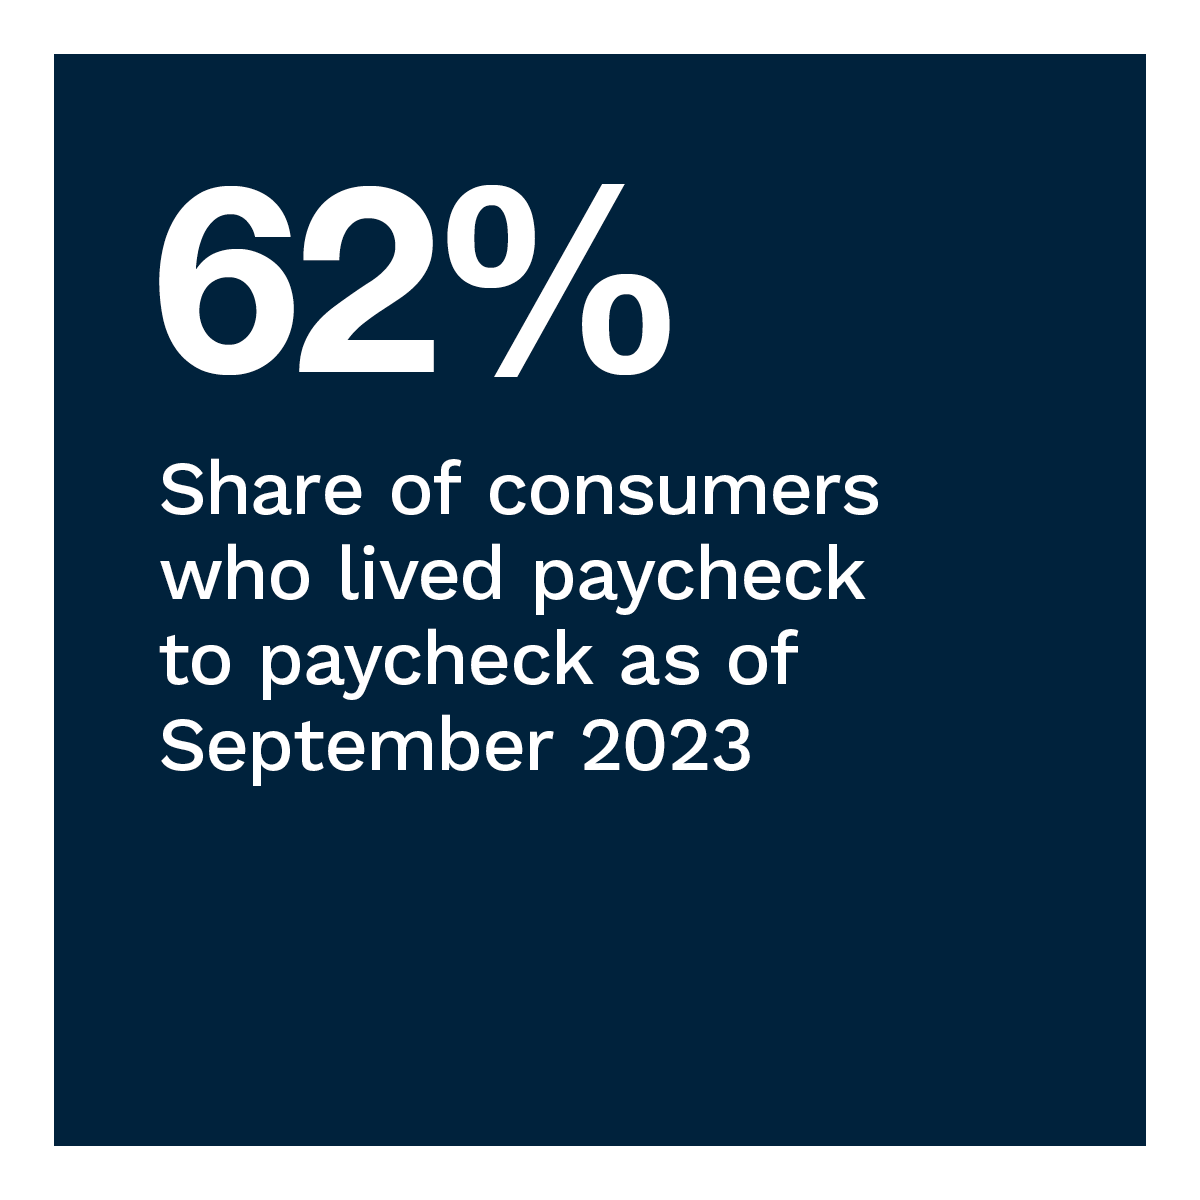 62%: Share of consumers who lived paycheck to paycheck as of September 2023